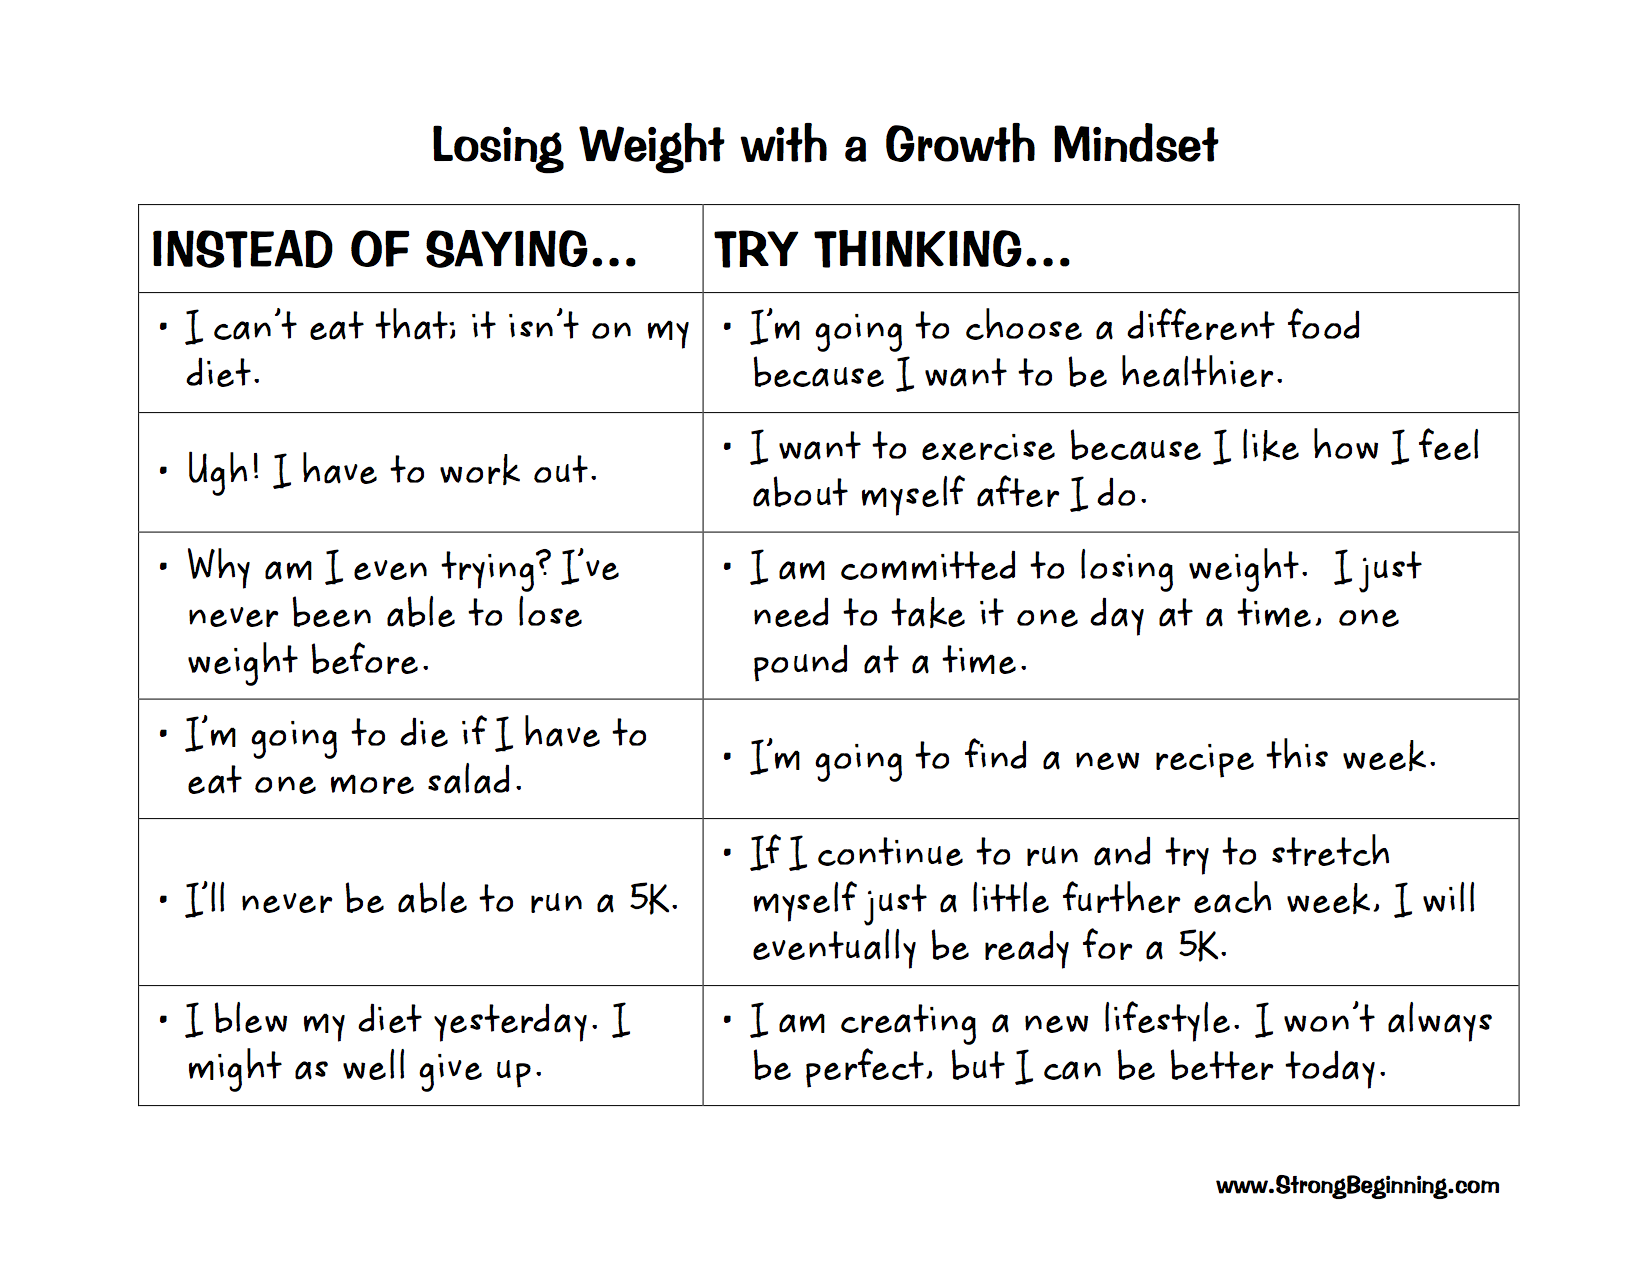 Losing Weight & Growth Mindset